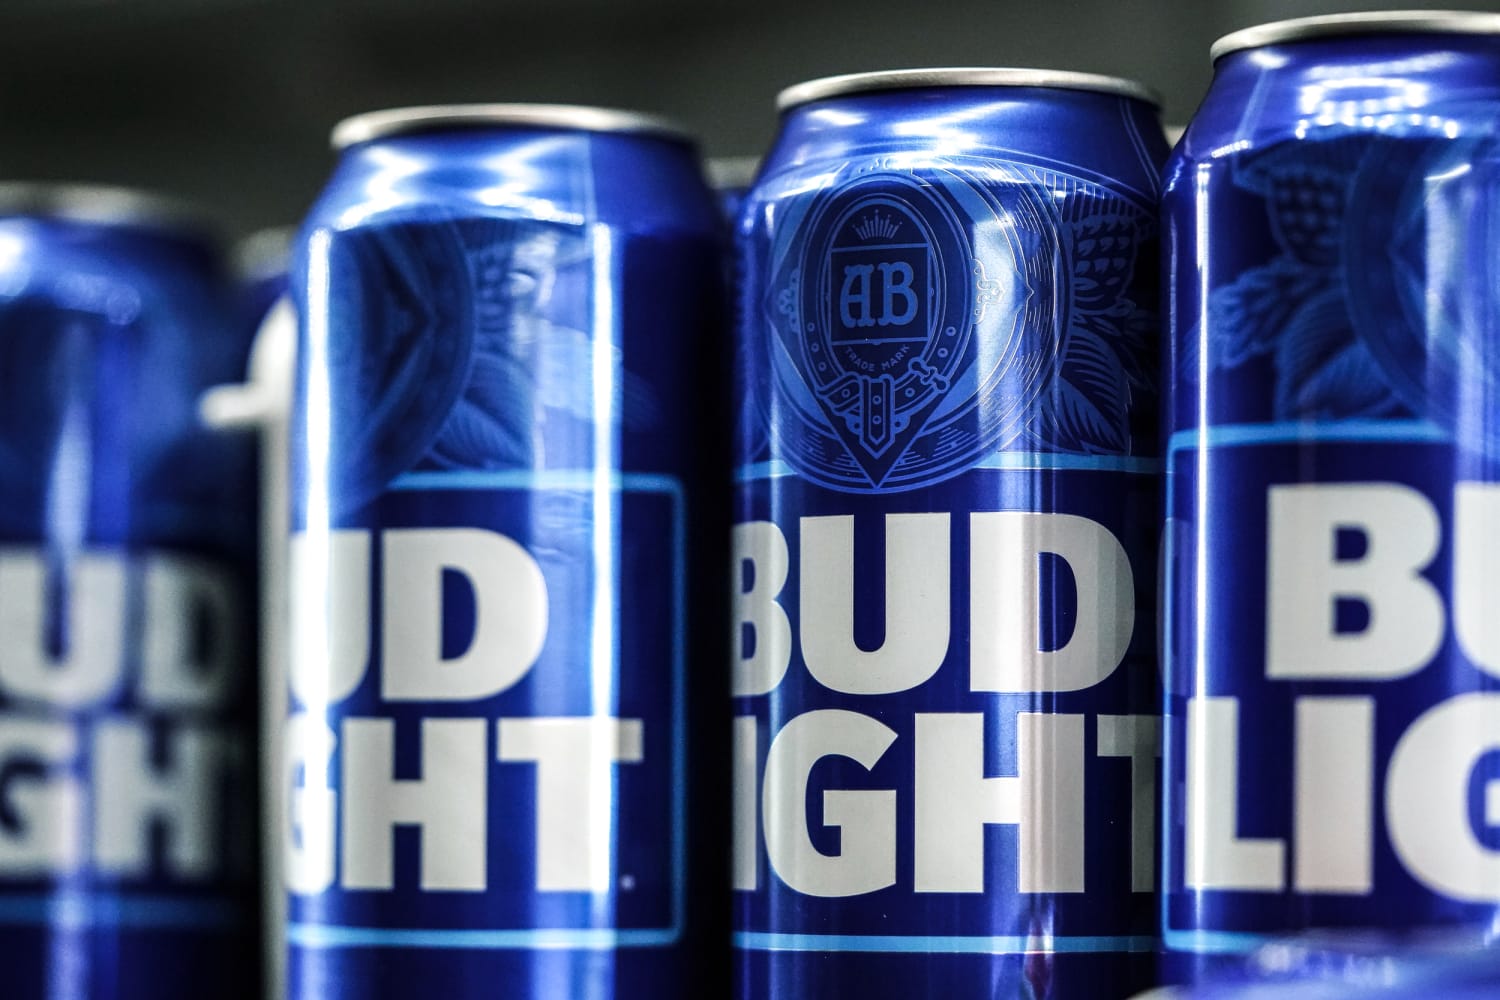 Bud Light on us': Budweiser parent now offering money back to customers to boost sales